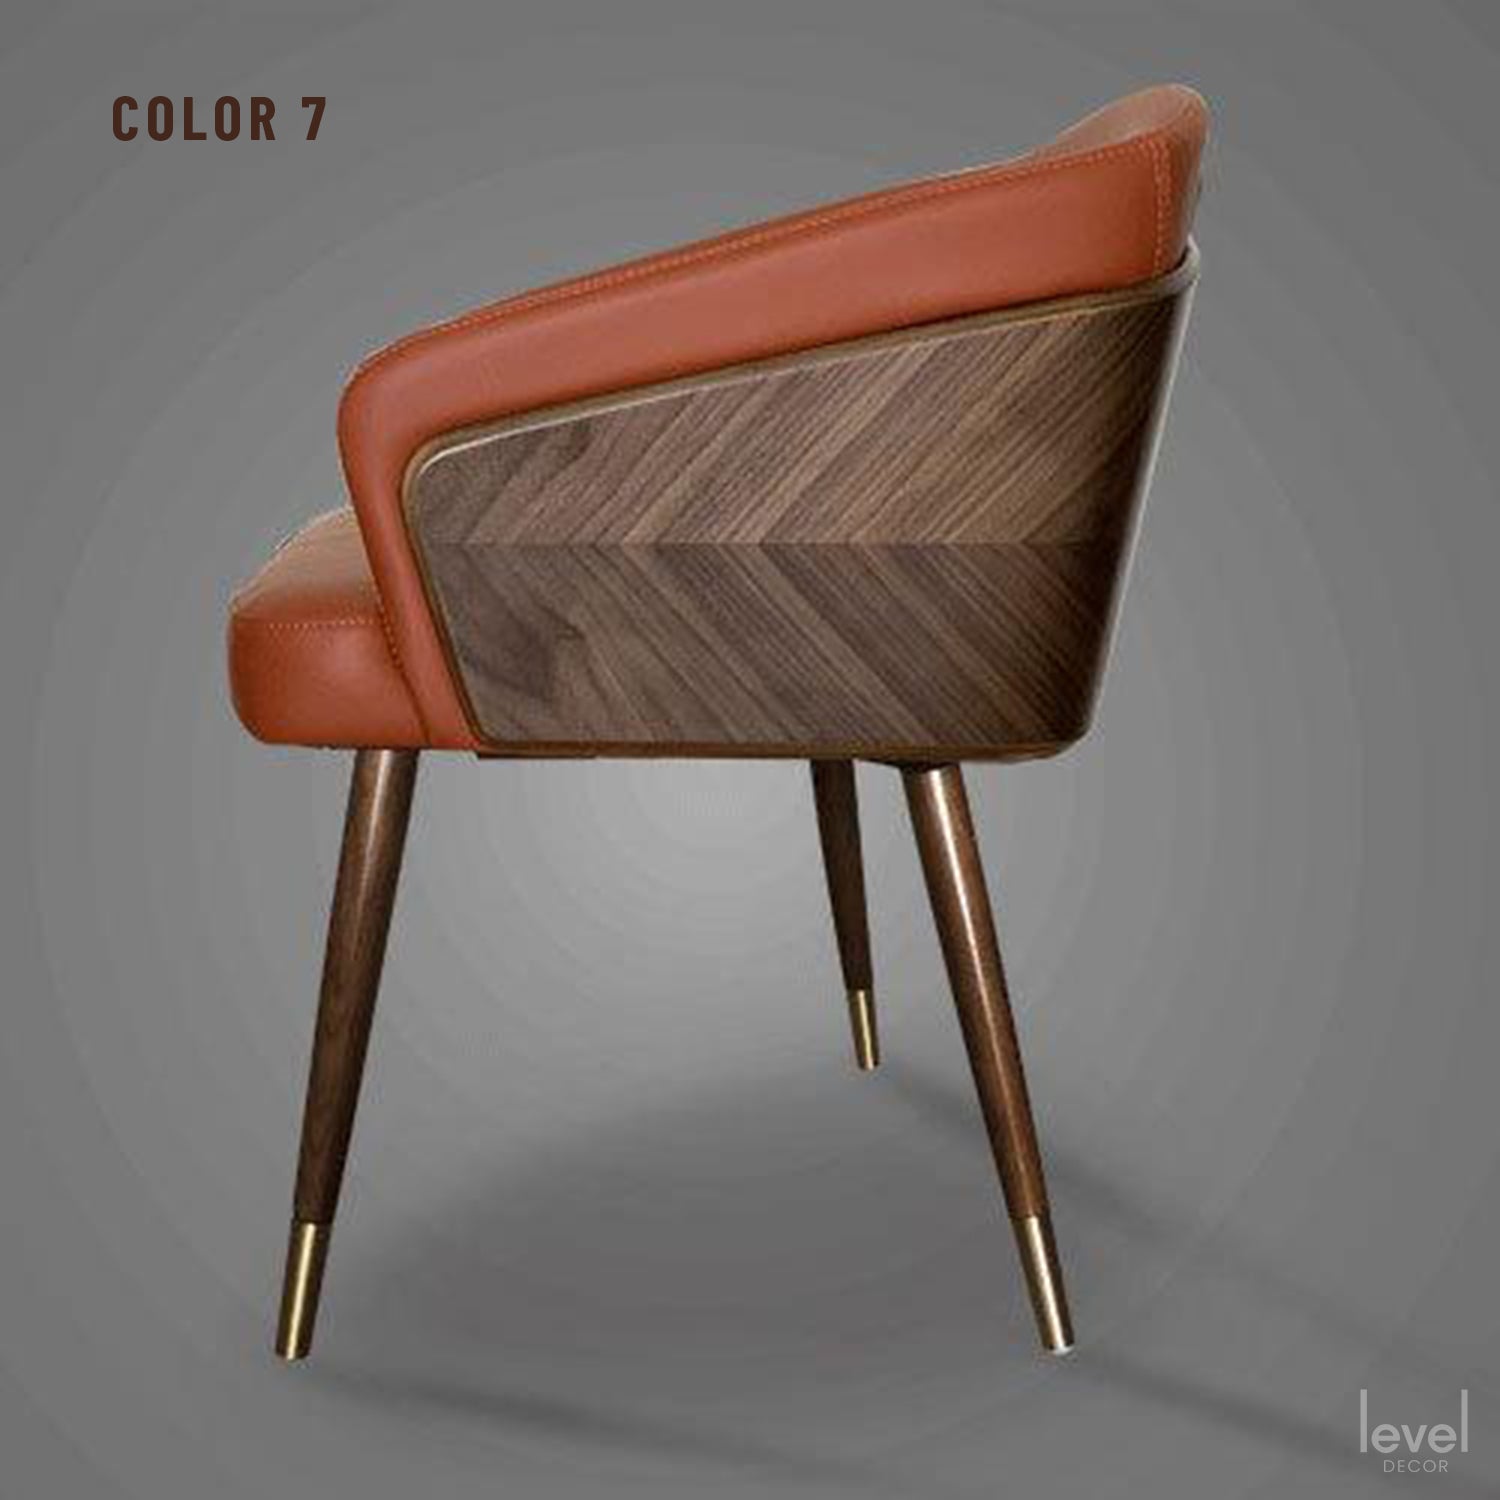 Modern Solid Wood Leisure Chairs - Color 7 - Level Decor